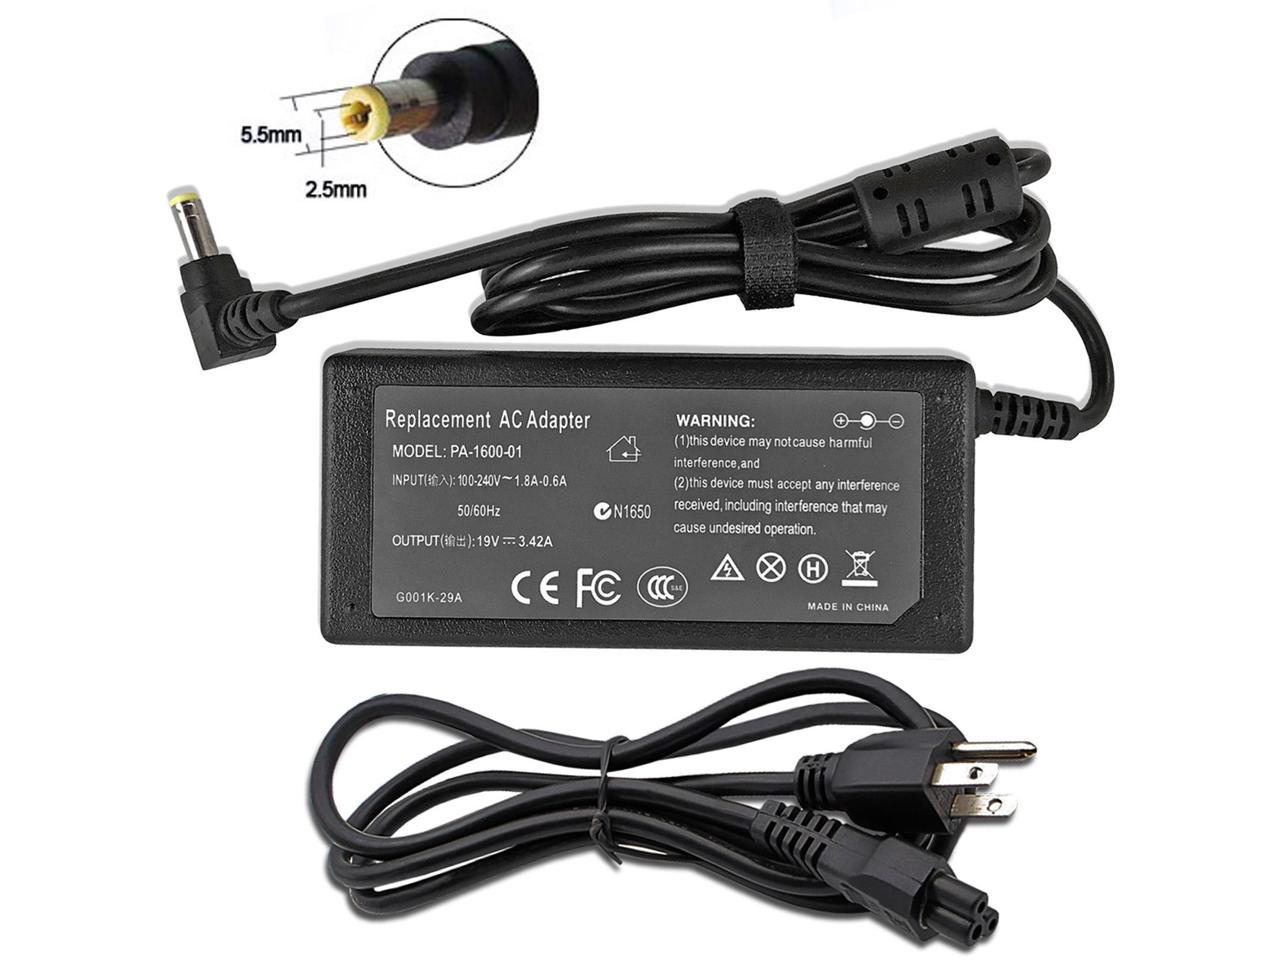 OEM ASUS 65W 19V 3.42A AC Adapter Power Supply Laptop Charger 